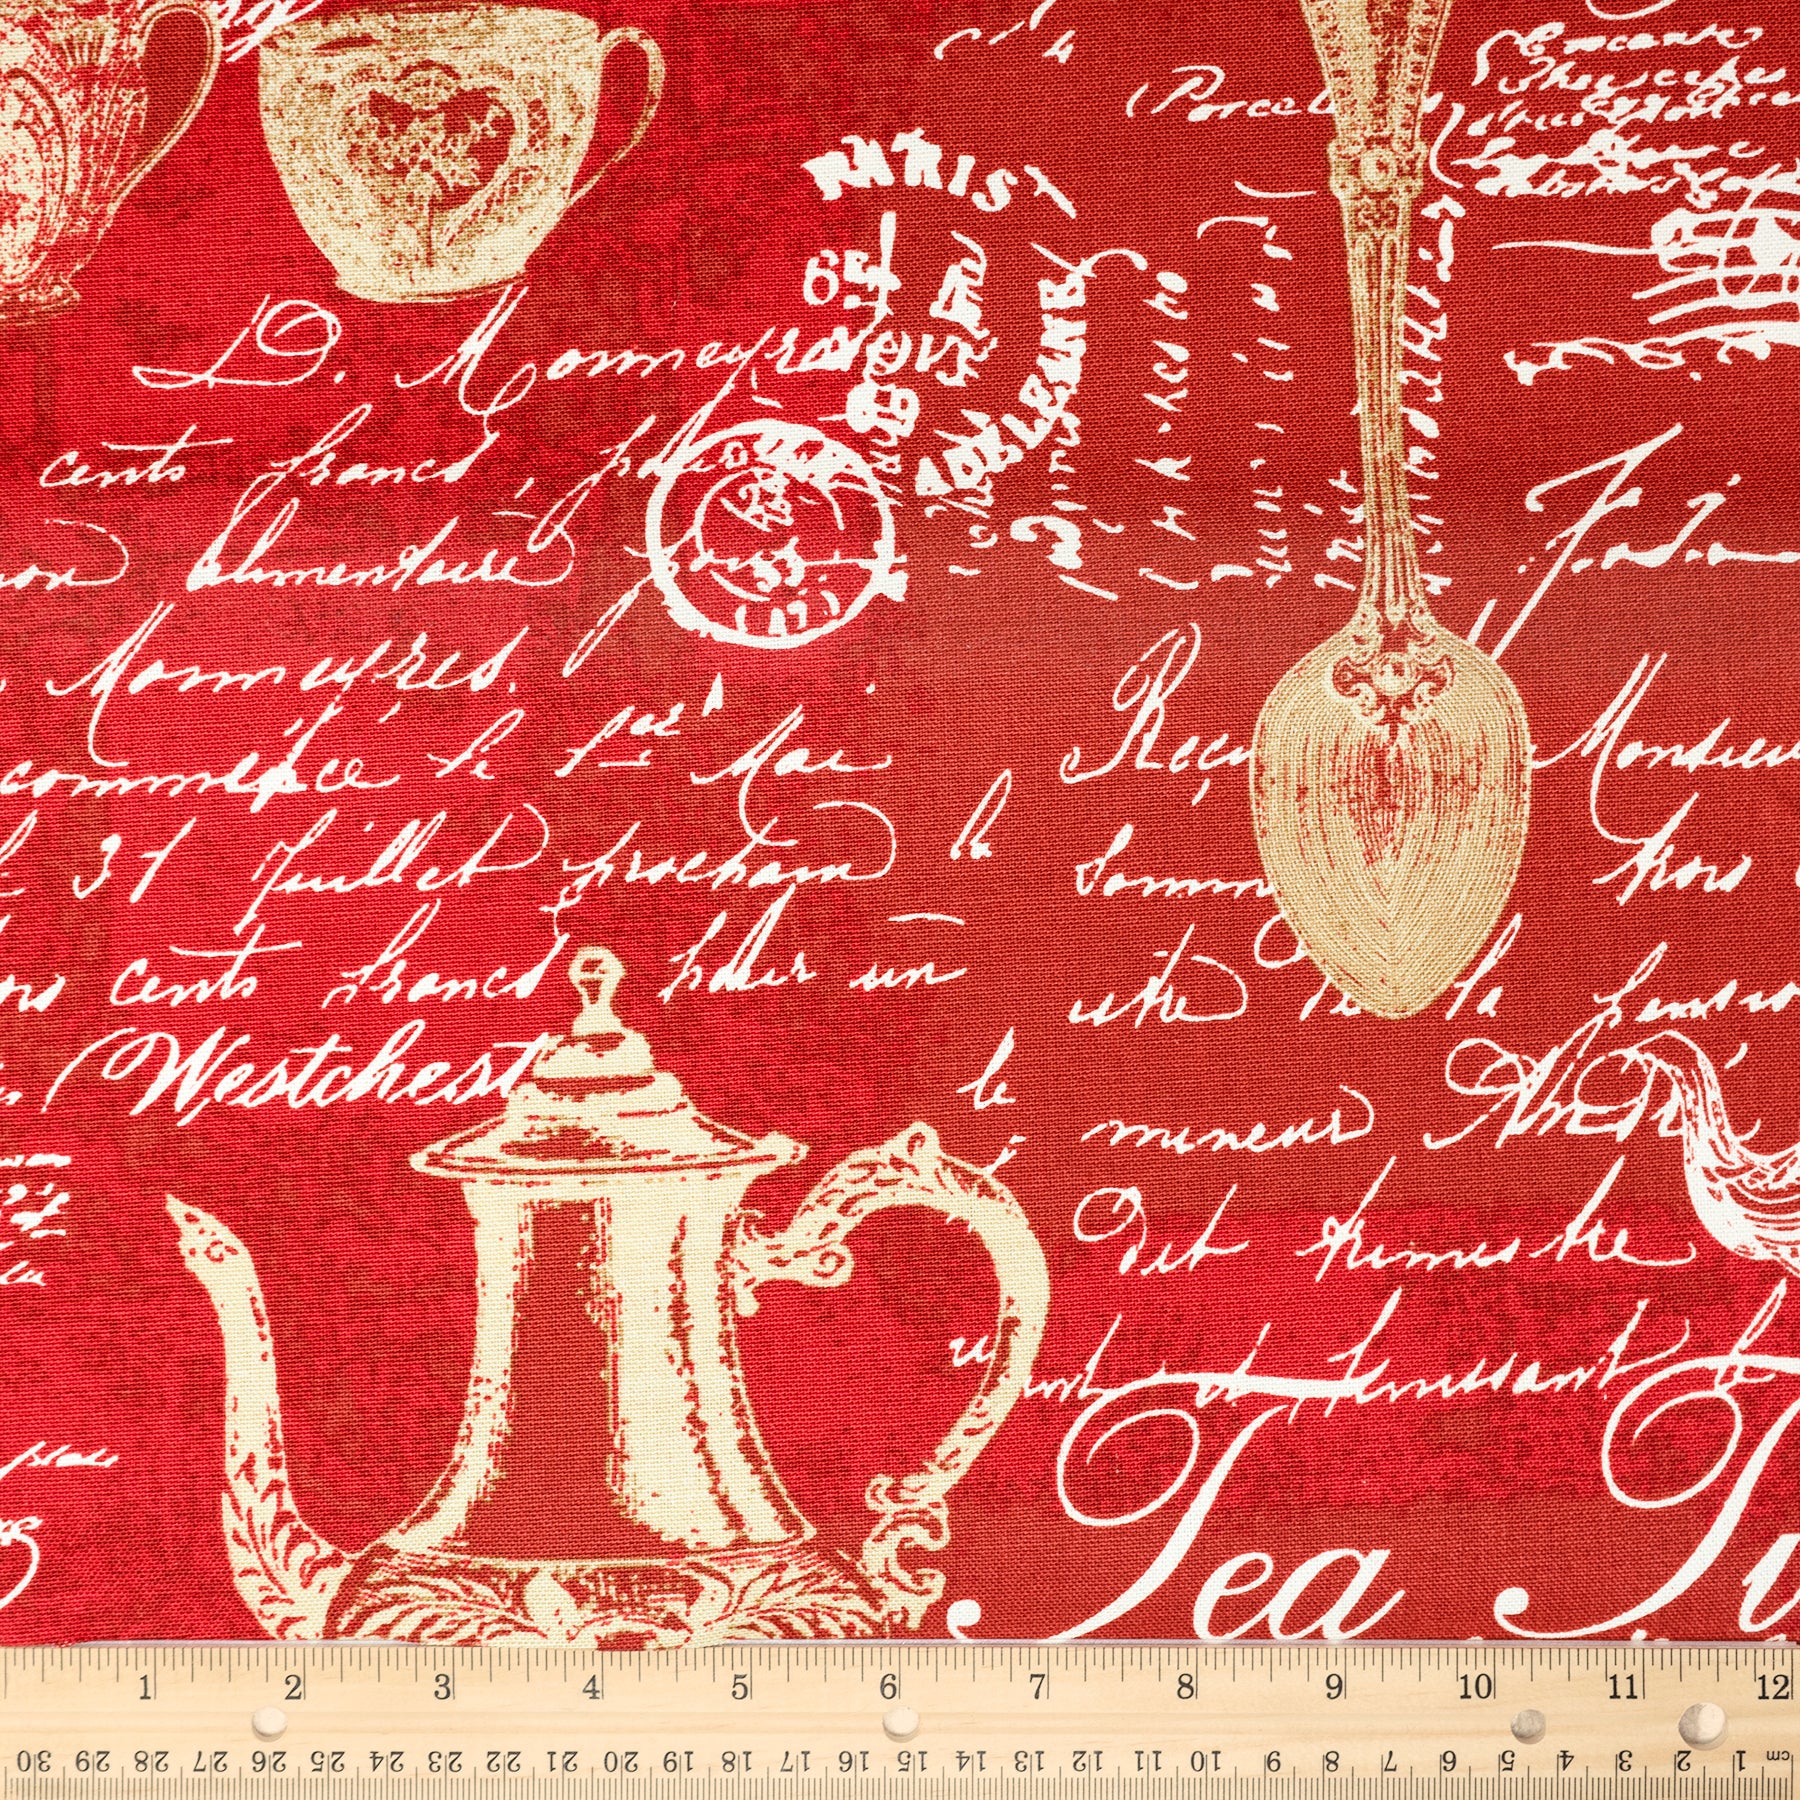 Waverly Inspirations 100% Cotton Duck 54" Teatime Red Color Sewing Fabric by the Yard